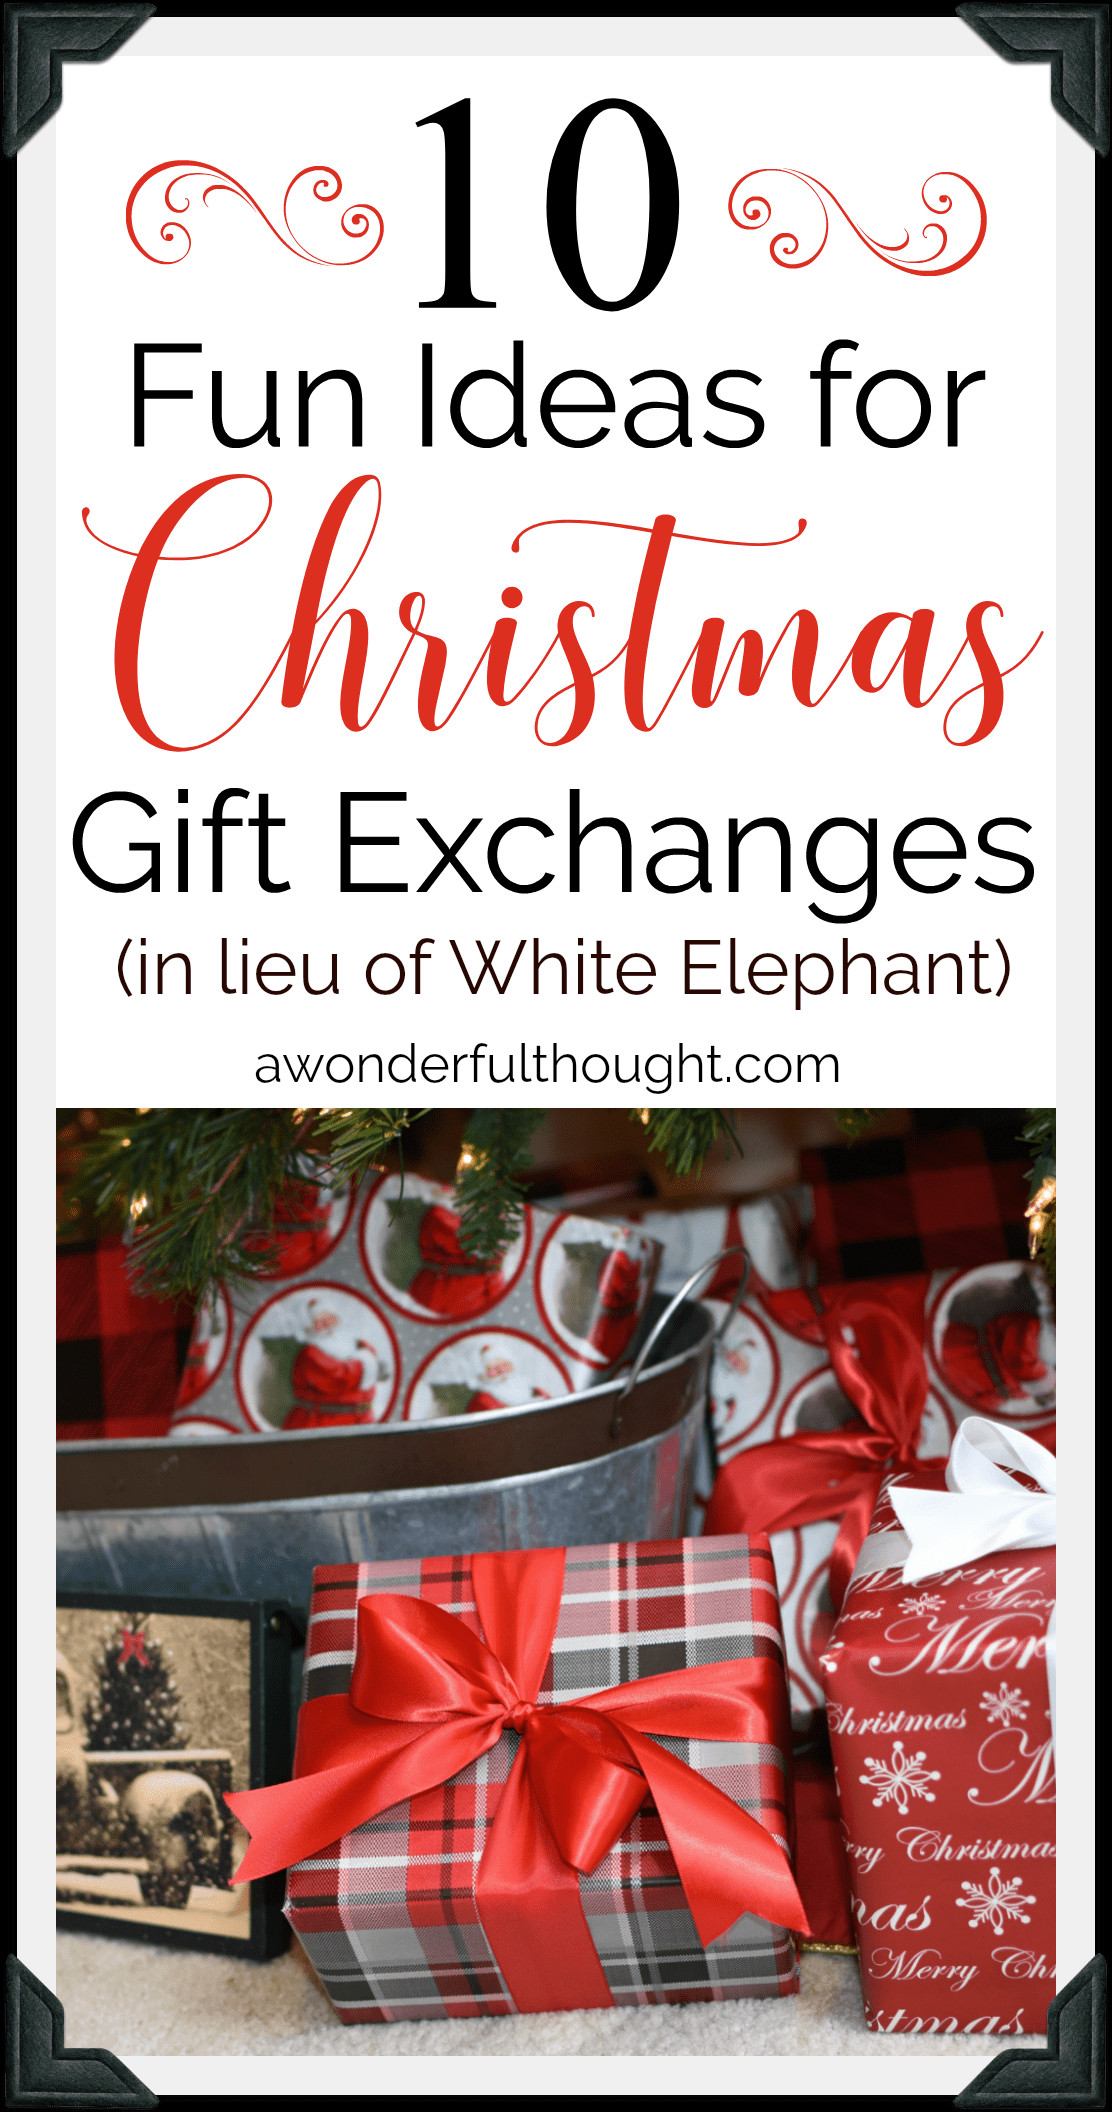 Holiday Gift Exchange Ideas
 Christmas Gift Exchange Ideas A Wonderful Thought